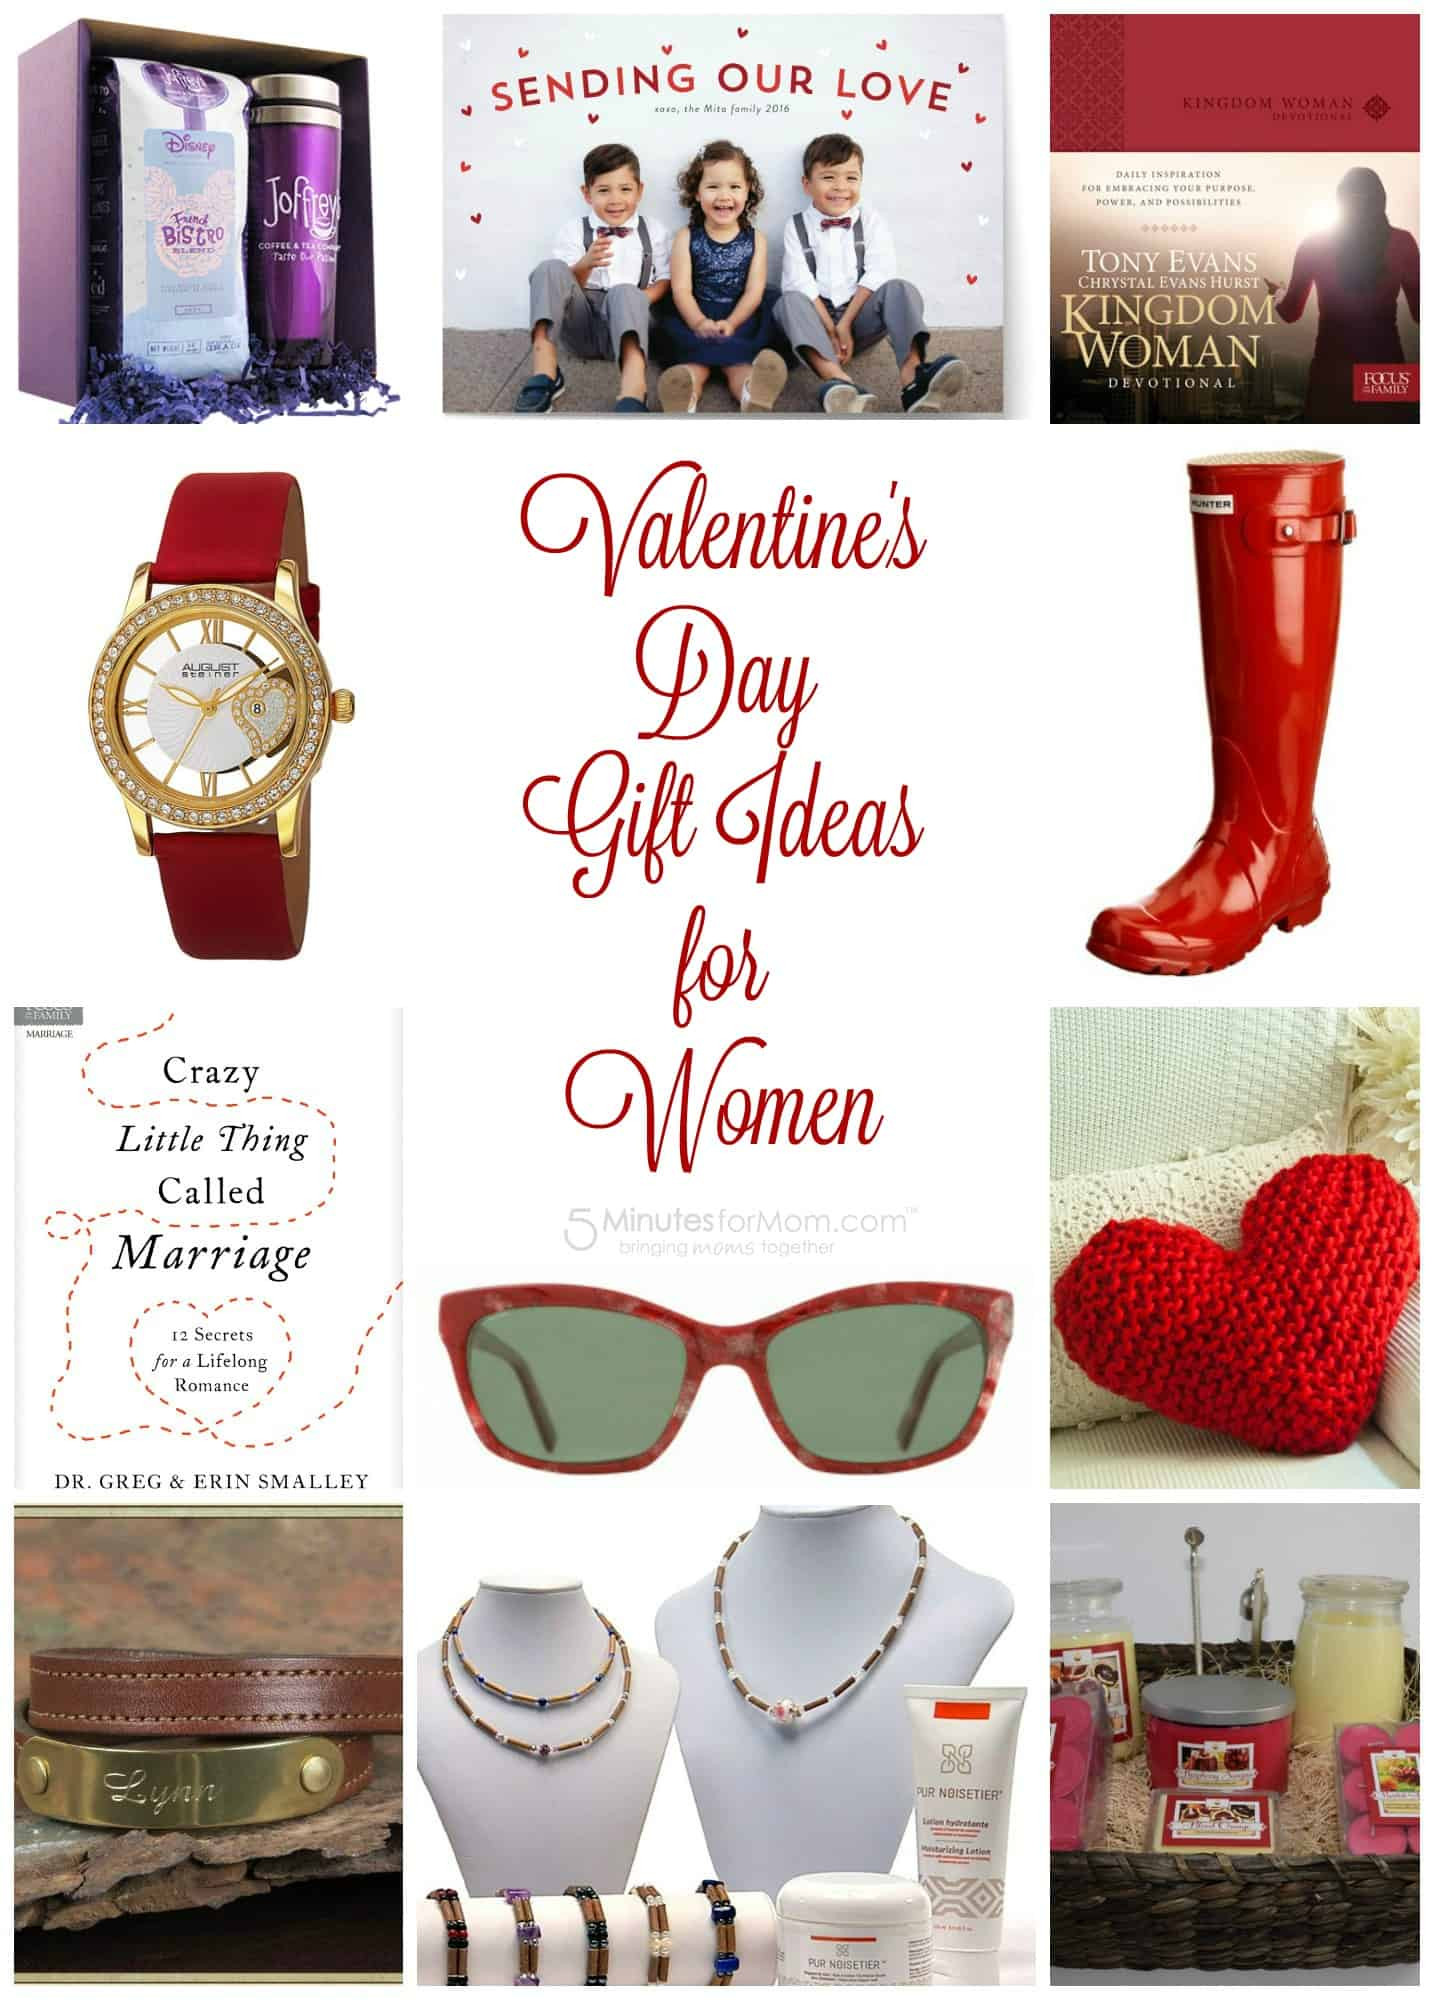 Valentine Day Gift Ideas For Women
 Valentine s Day Gift Guide for Women Plus $100 Amazon